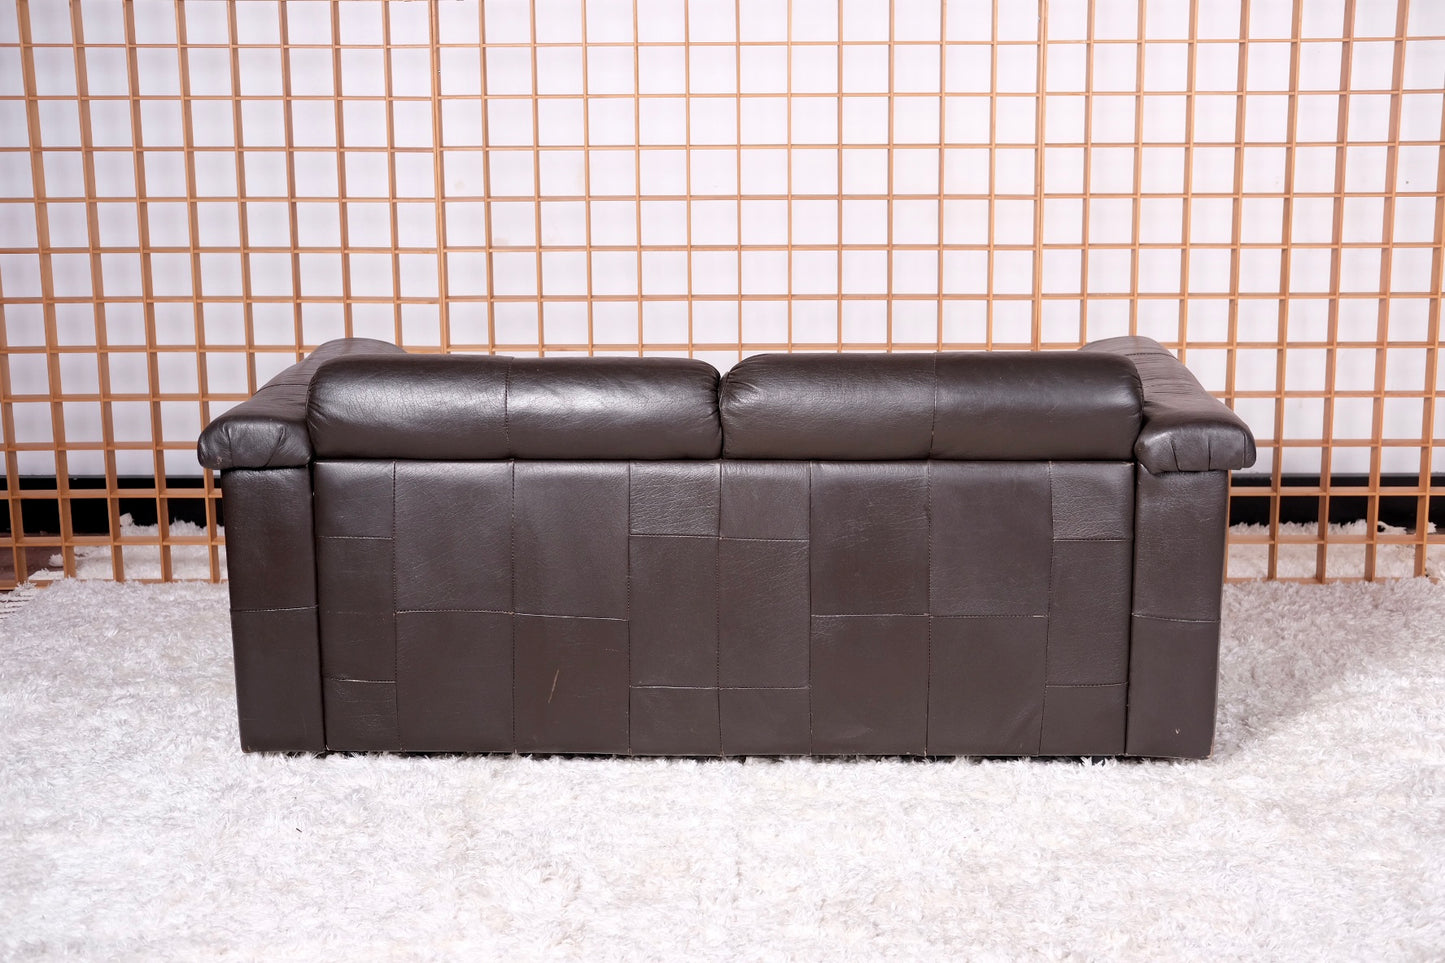 Percival Lafer Patchwork Leather Loveseat